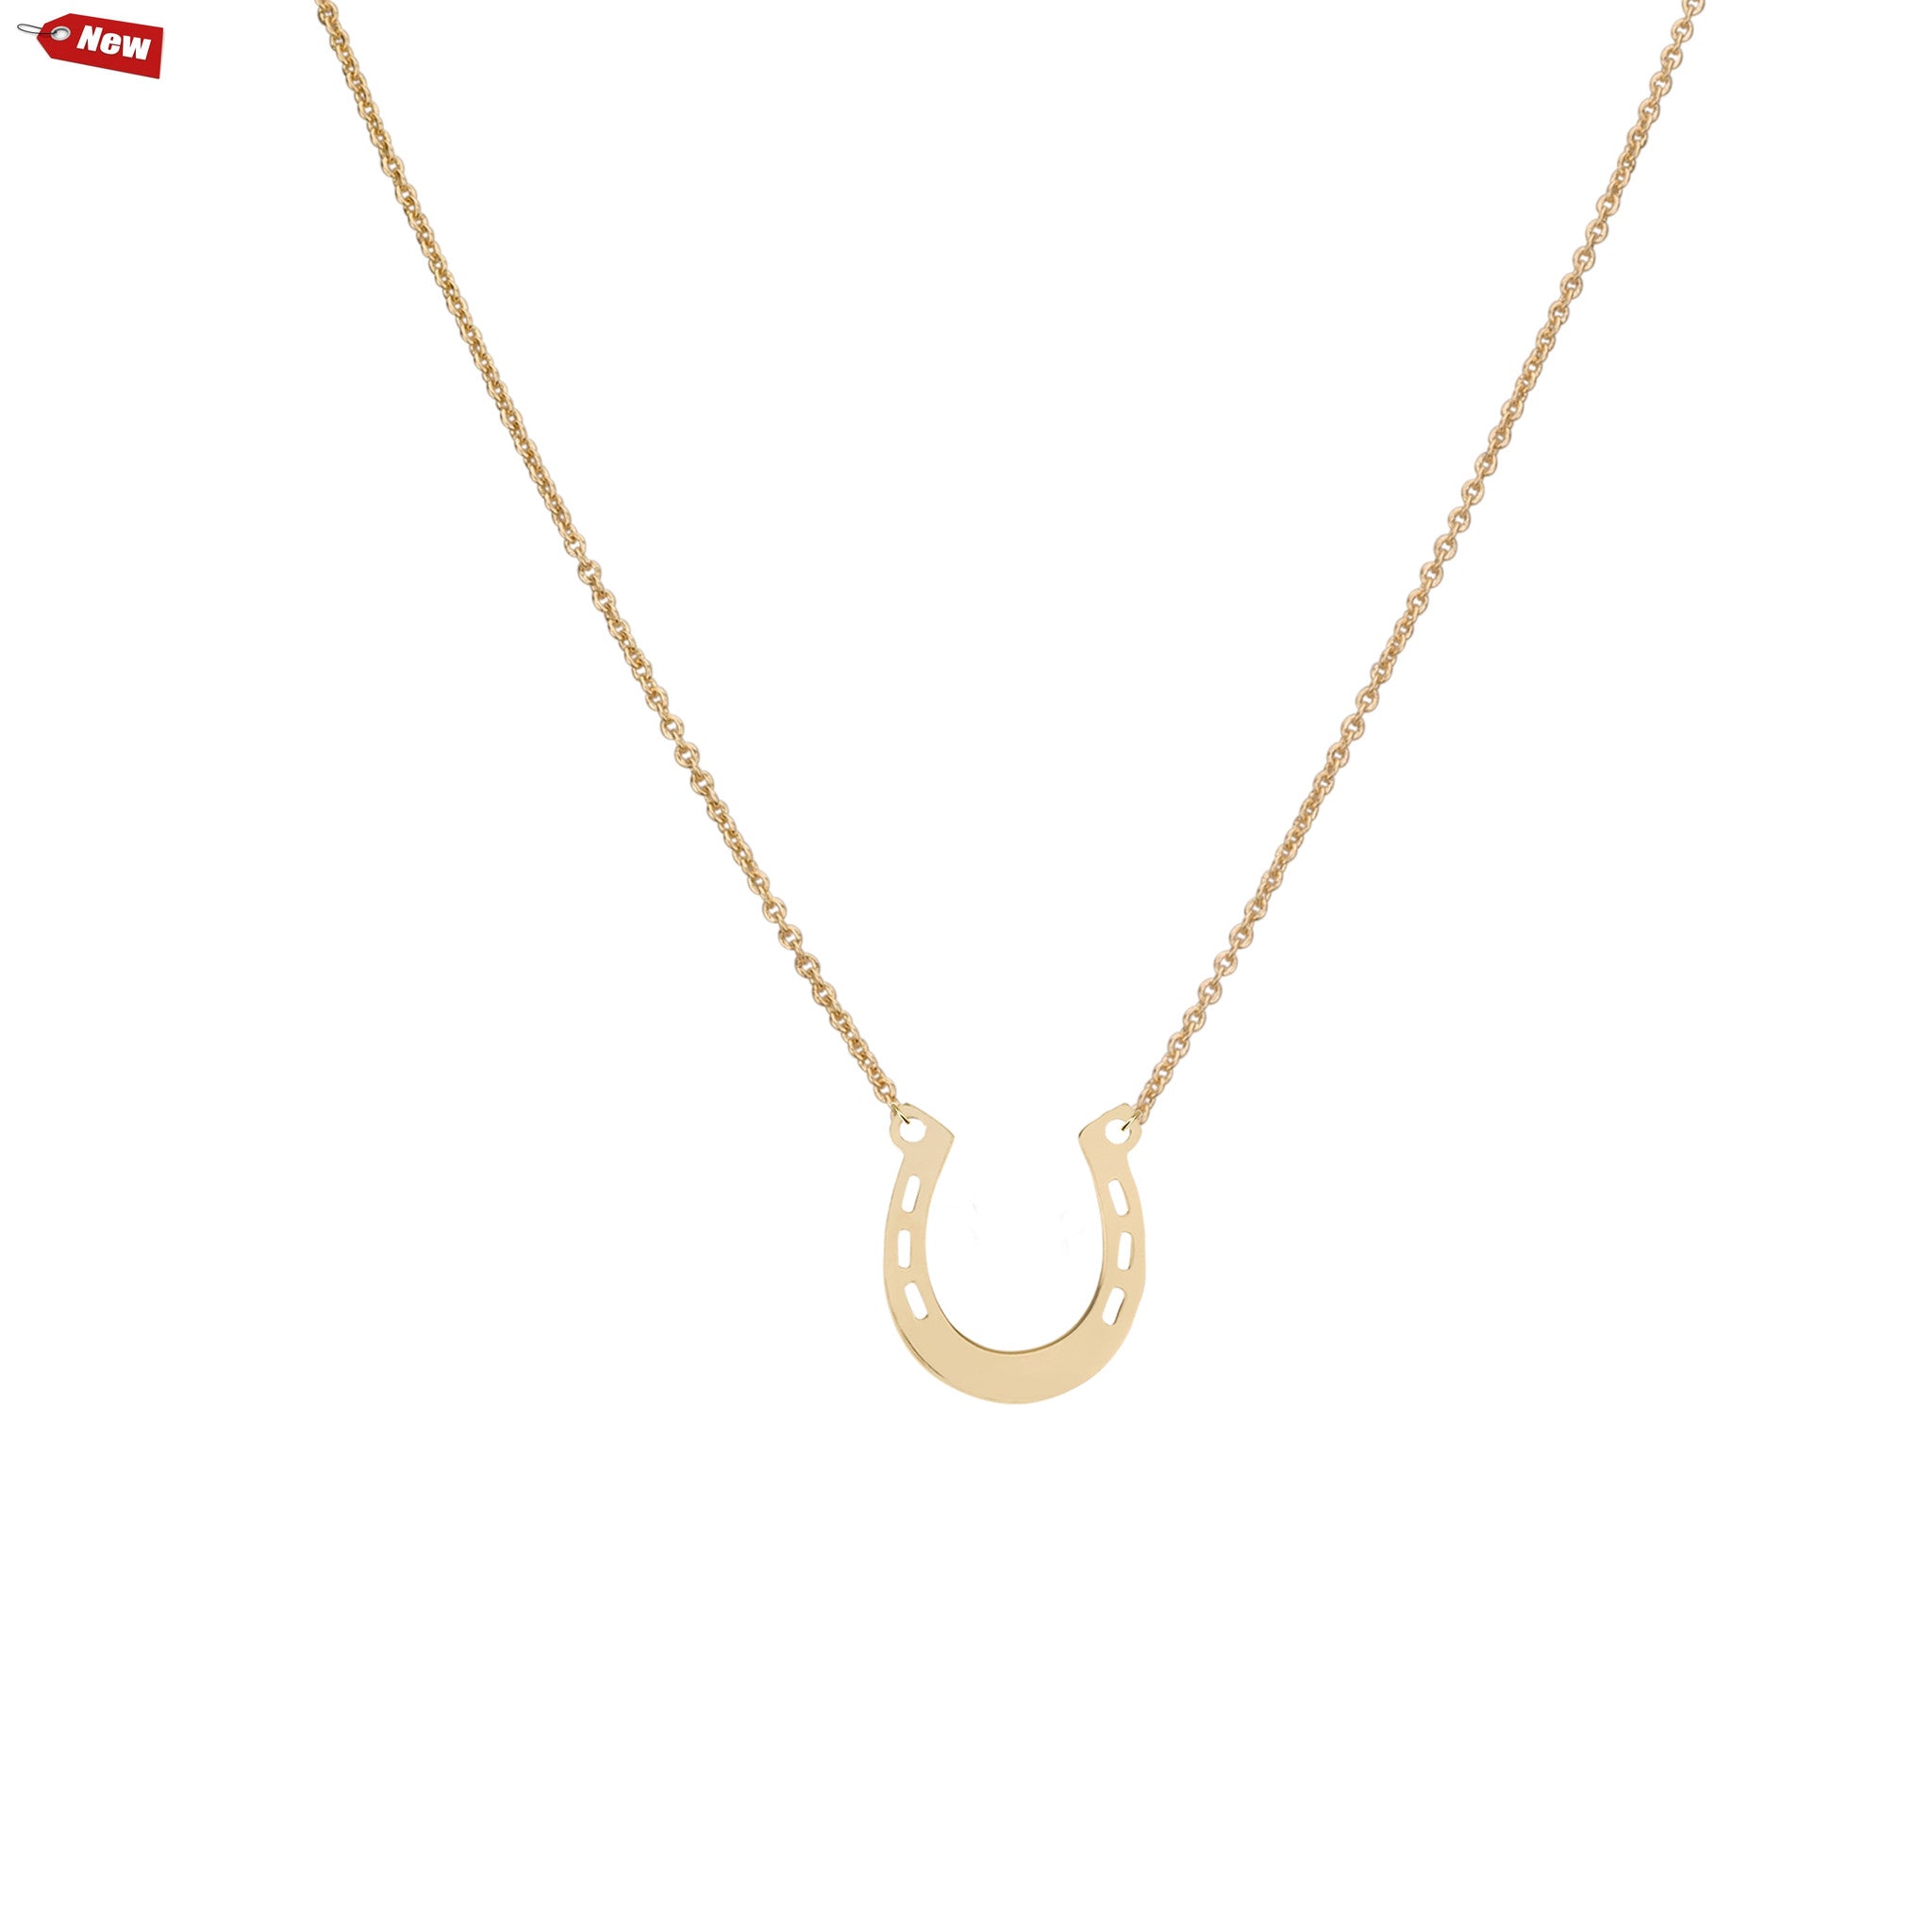 Necklaces - Big Lucky Horseshoe & Helen Chain Necklace